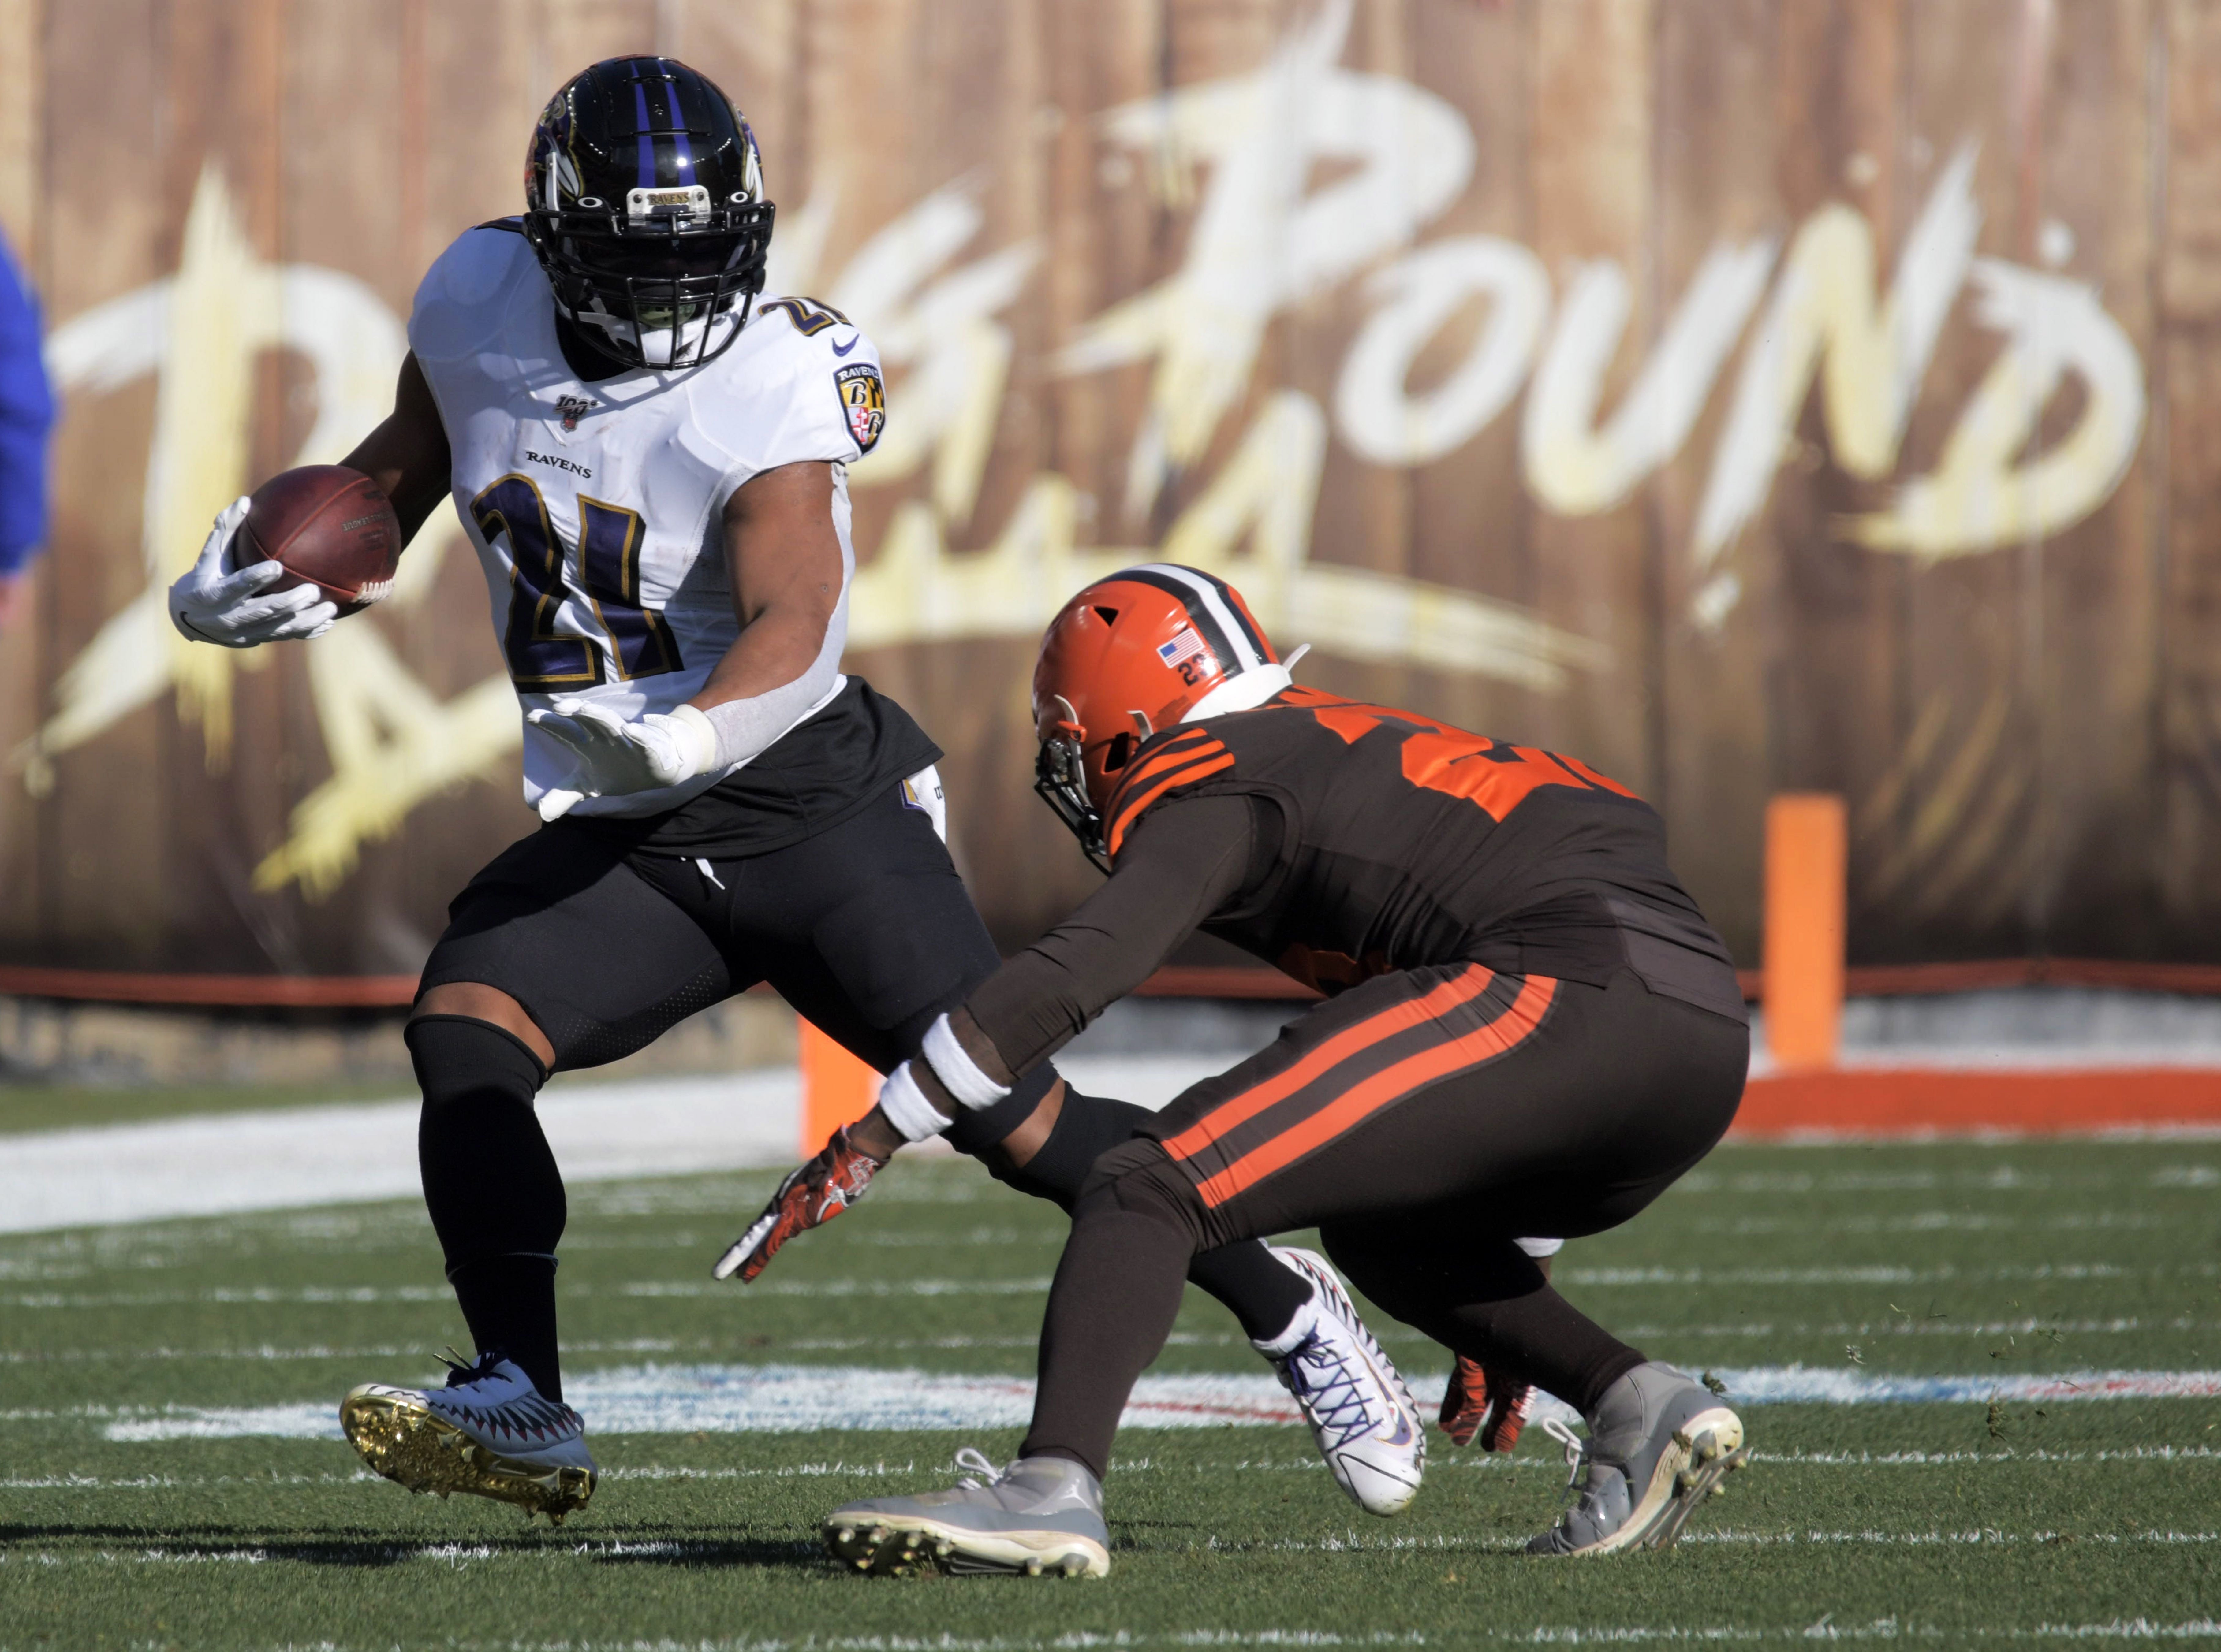 Report: Ravens RB Mark Ingram expected to play vs. Titans in divisional  round